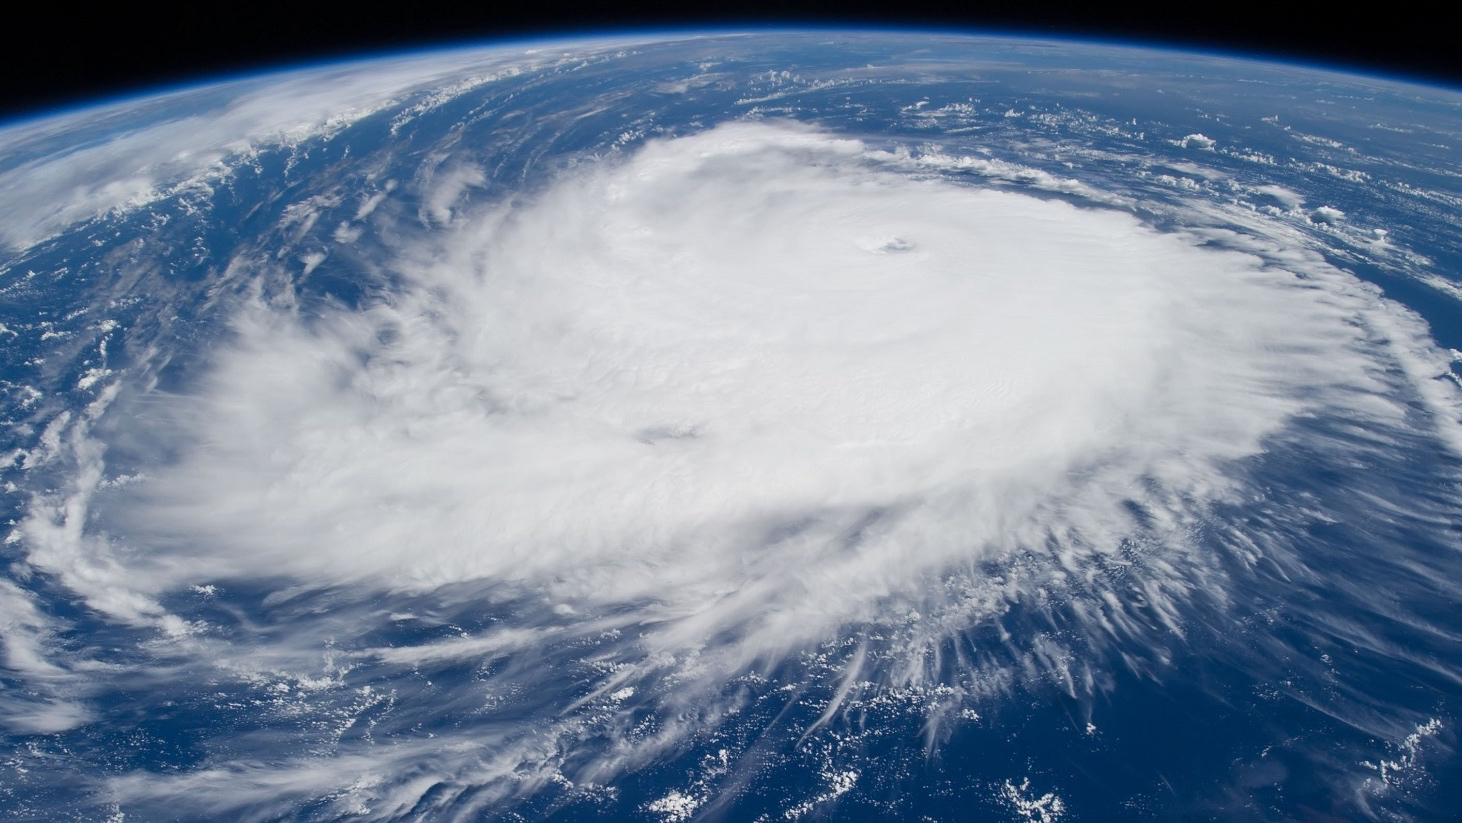 Study Explains Why Some Hurricanes Rapidly Intensify While Others Don’t